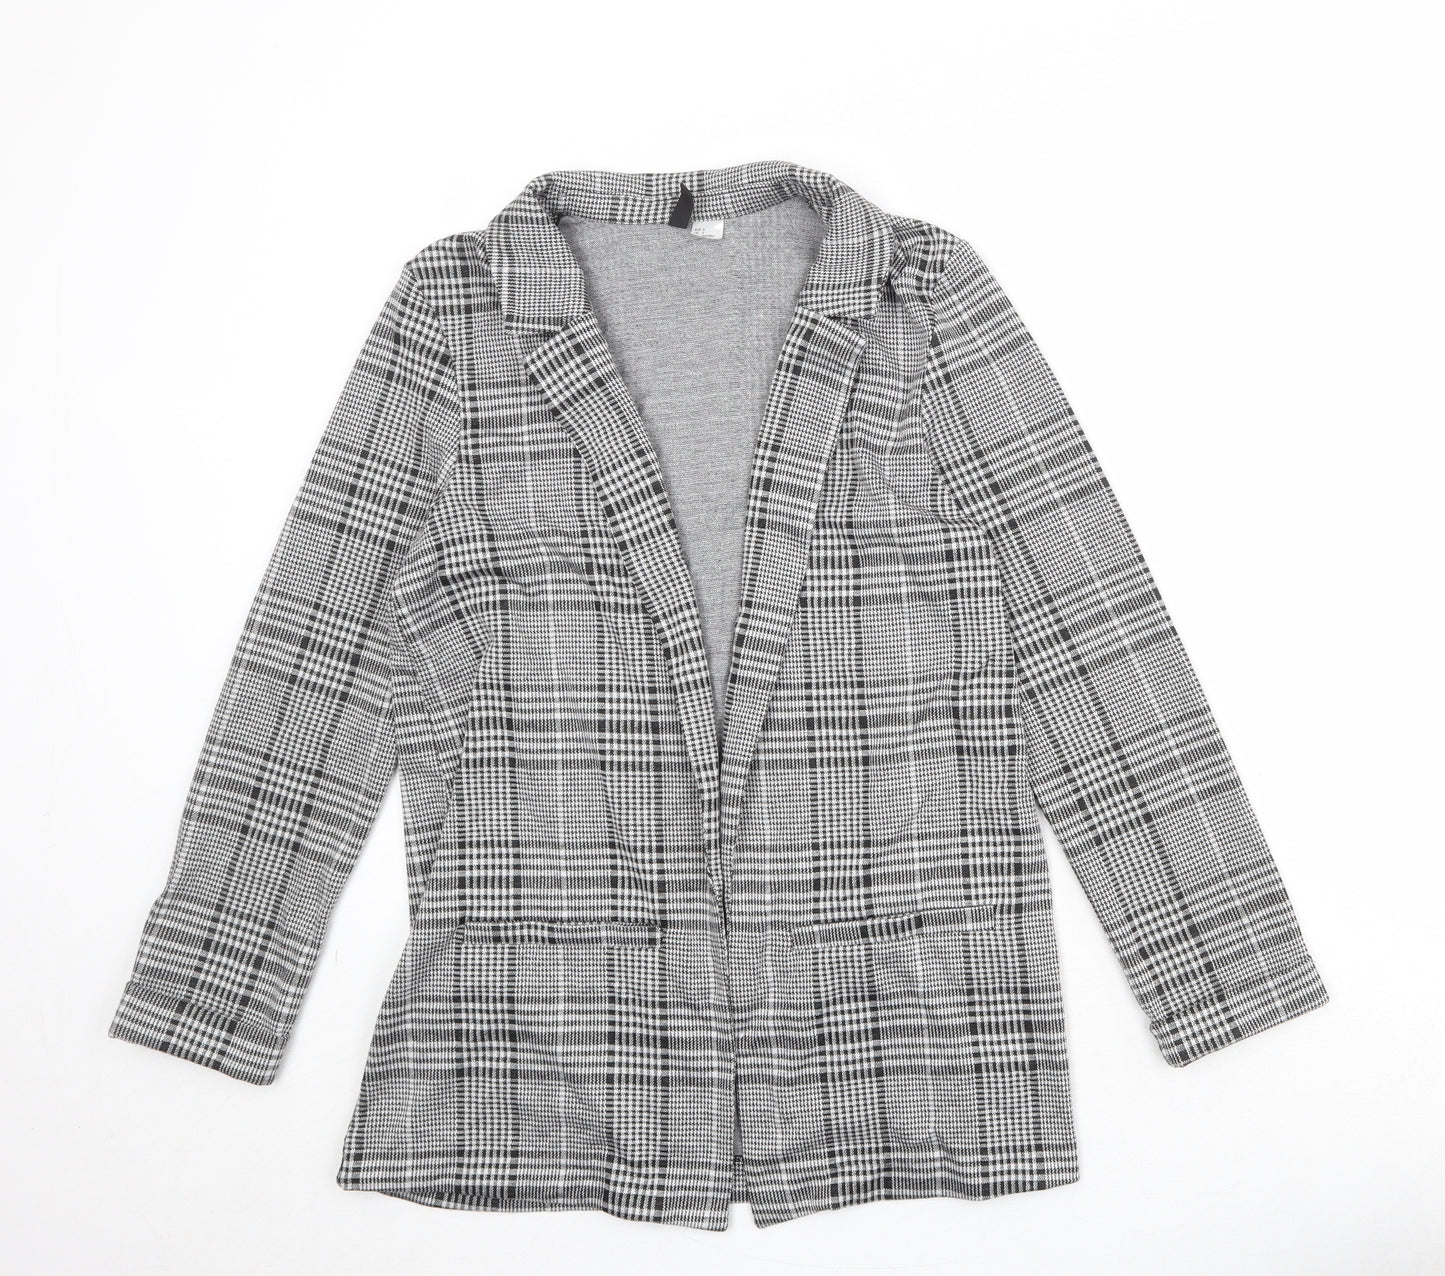 Divided Womens Black Plaid Polyester Jacket Blazer Size S - Open